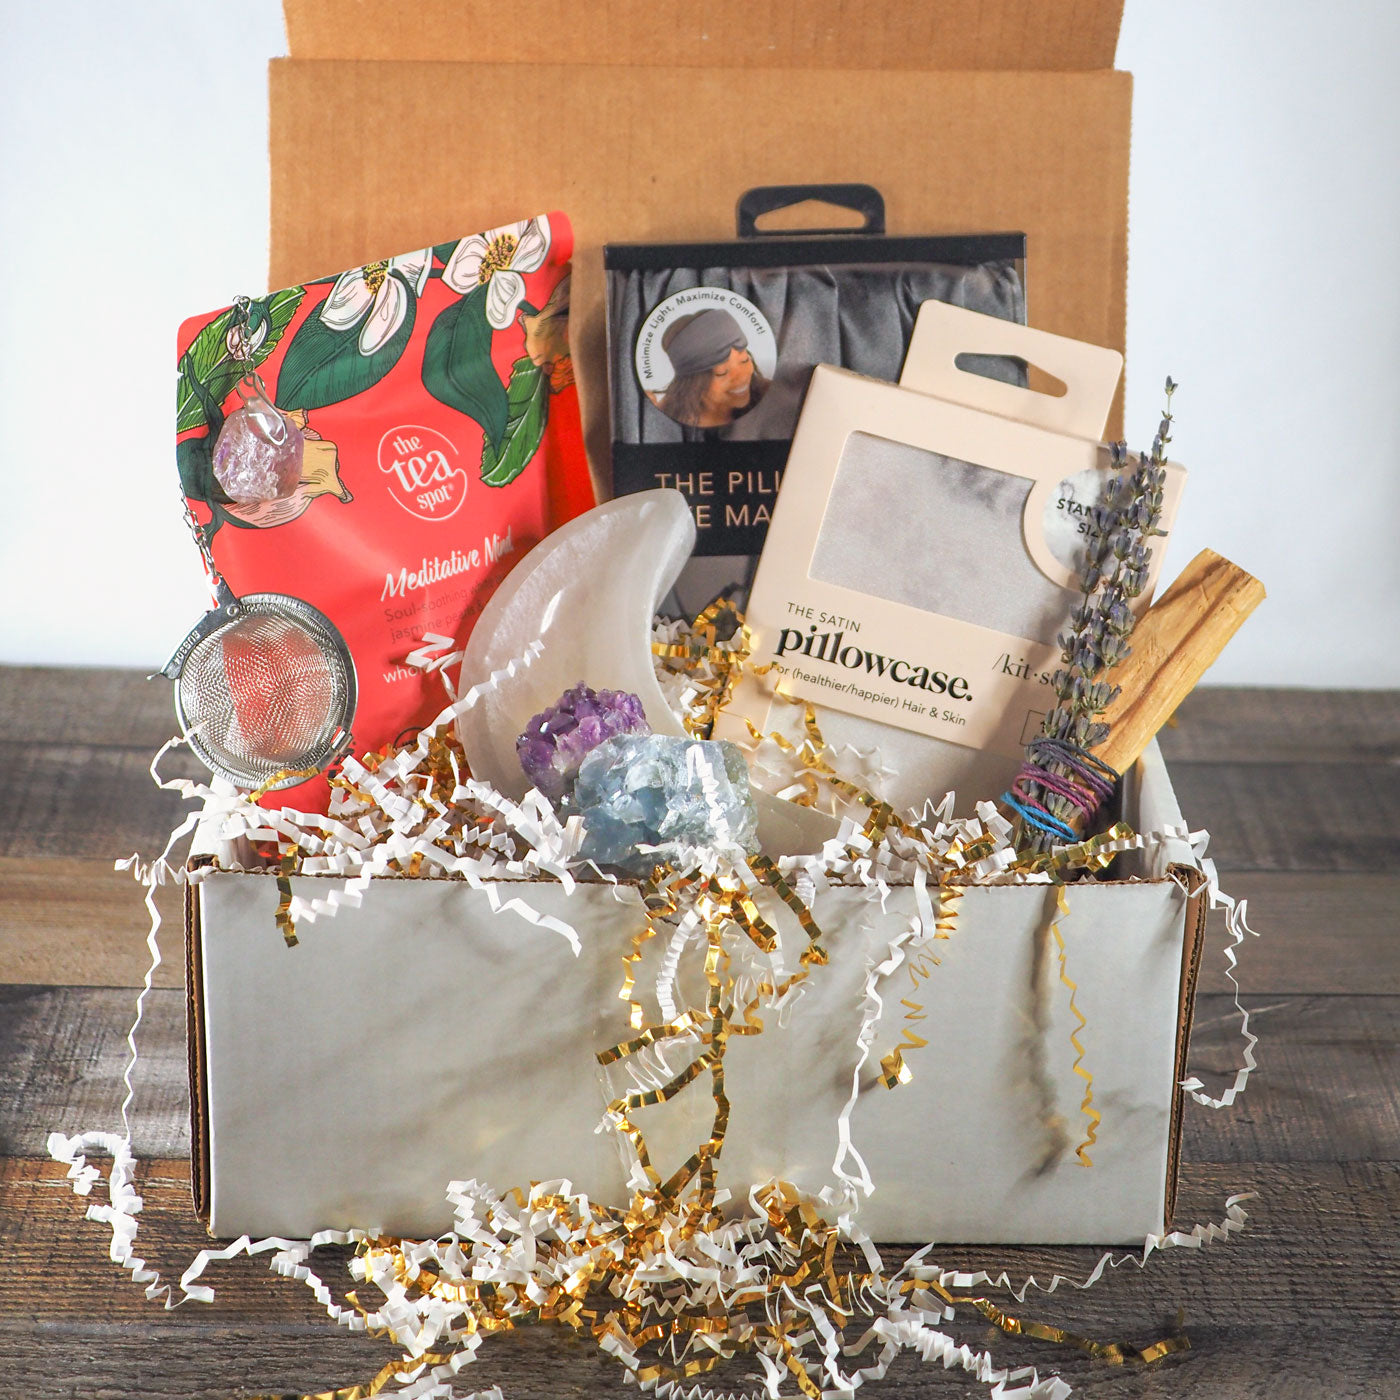 An example of the REST Gift Box